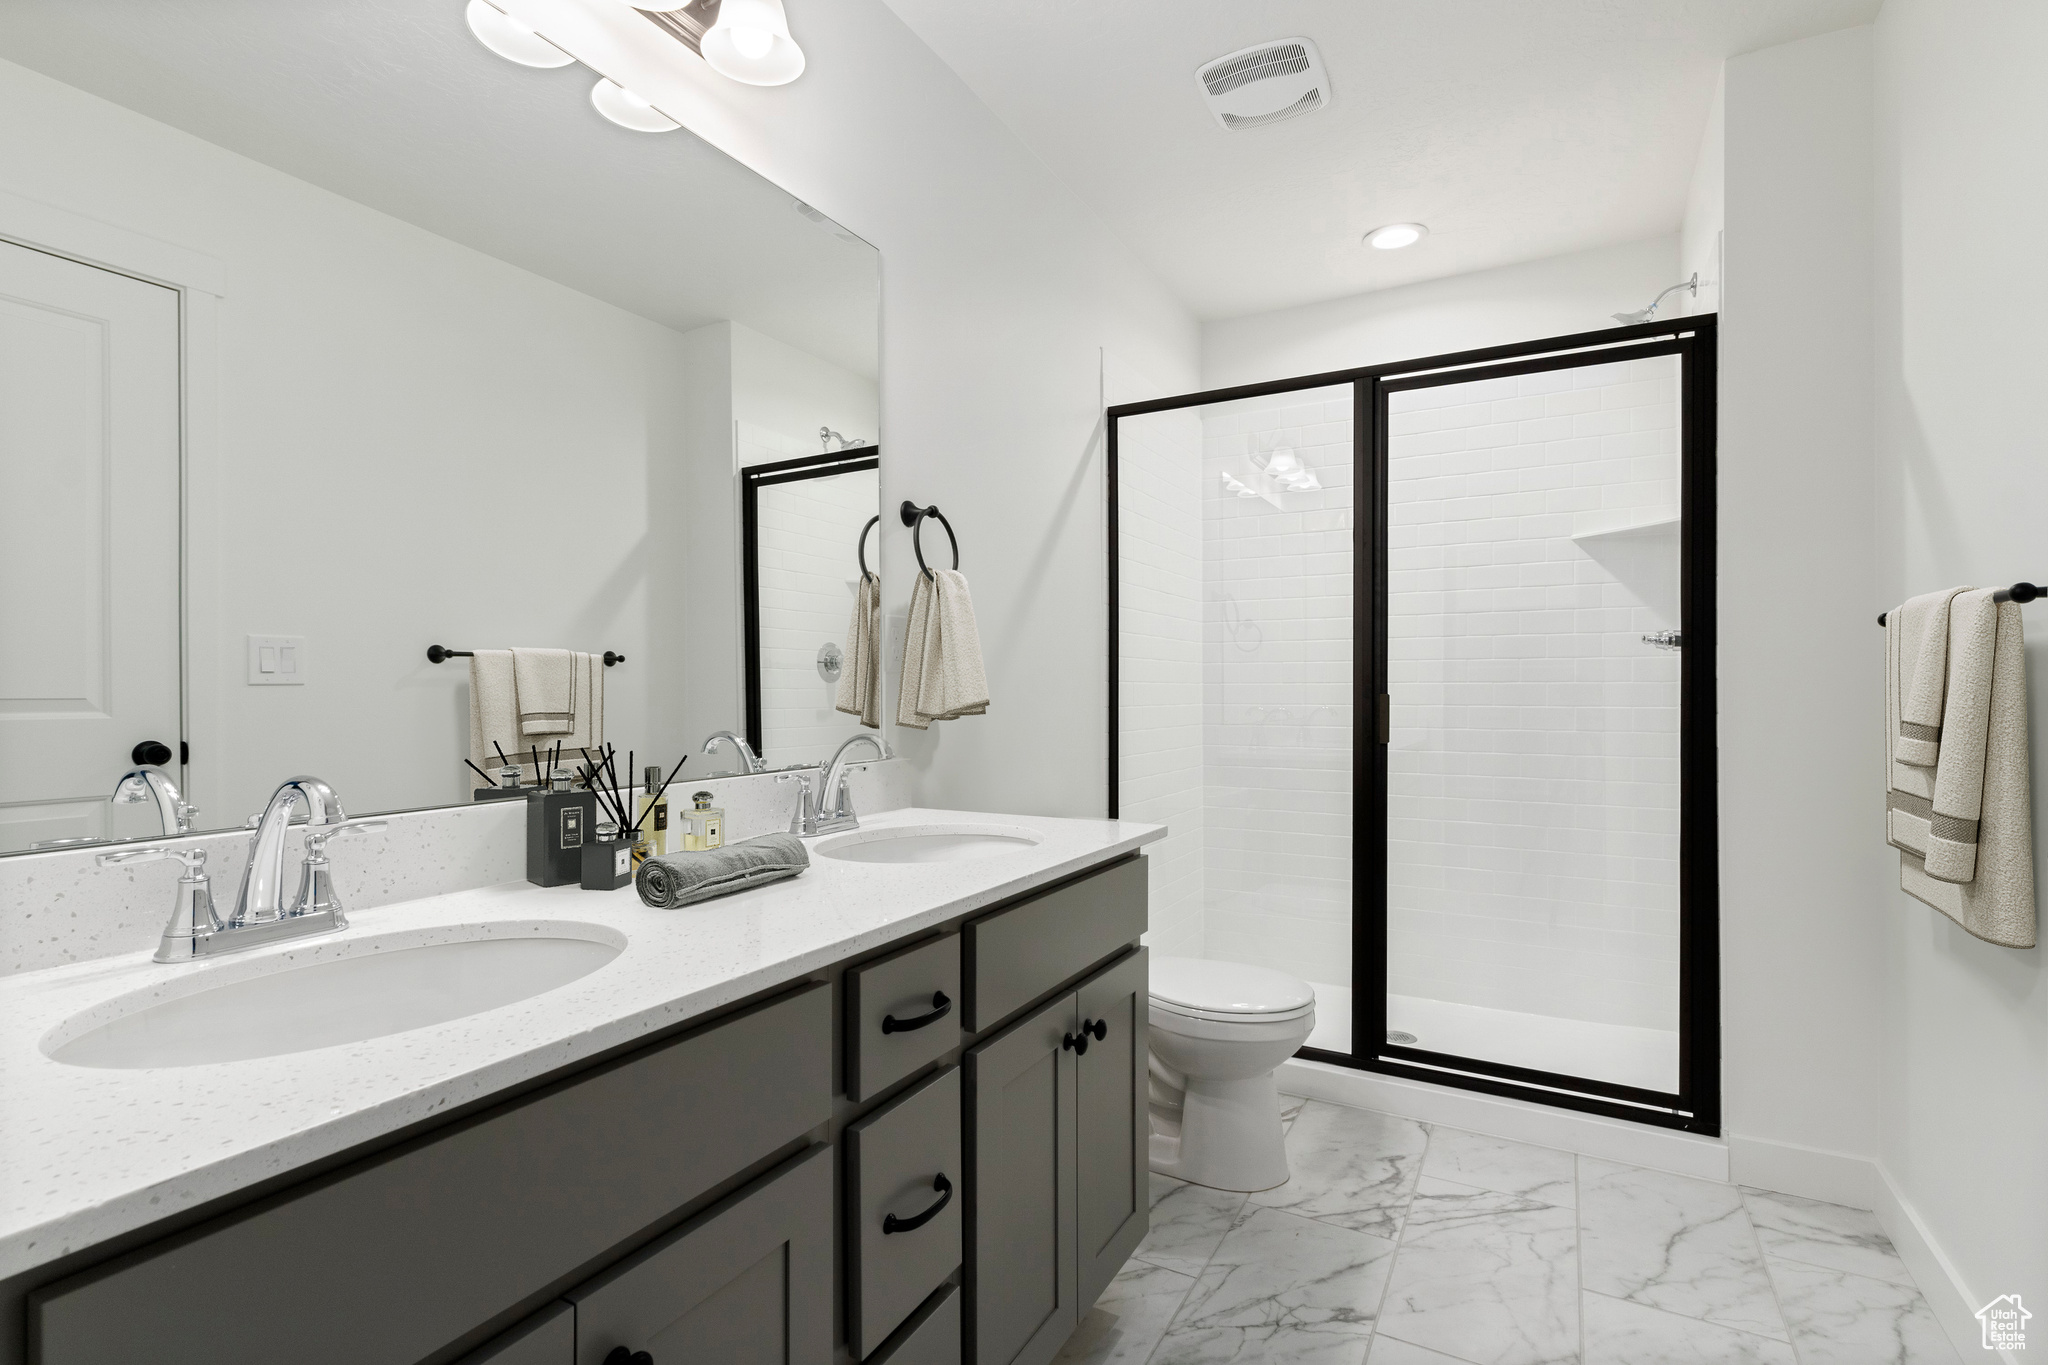 Bathroom with large vanity, double sink, tile floors, a shower with shower door, and toilet